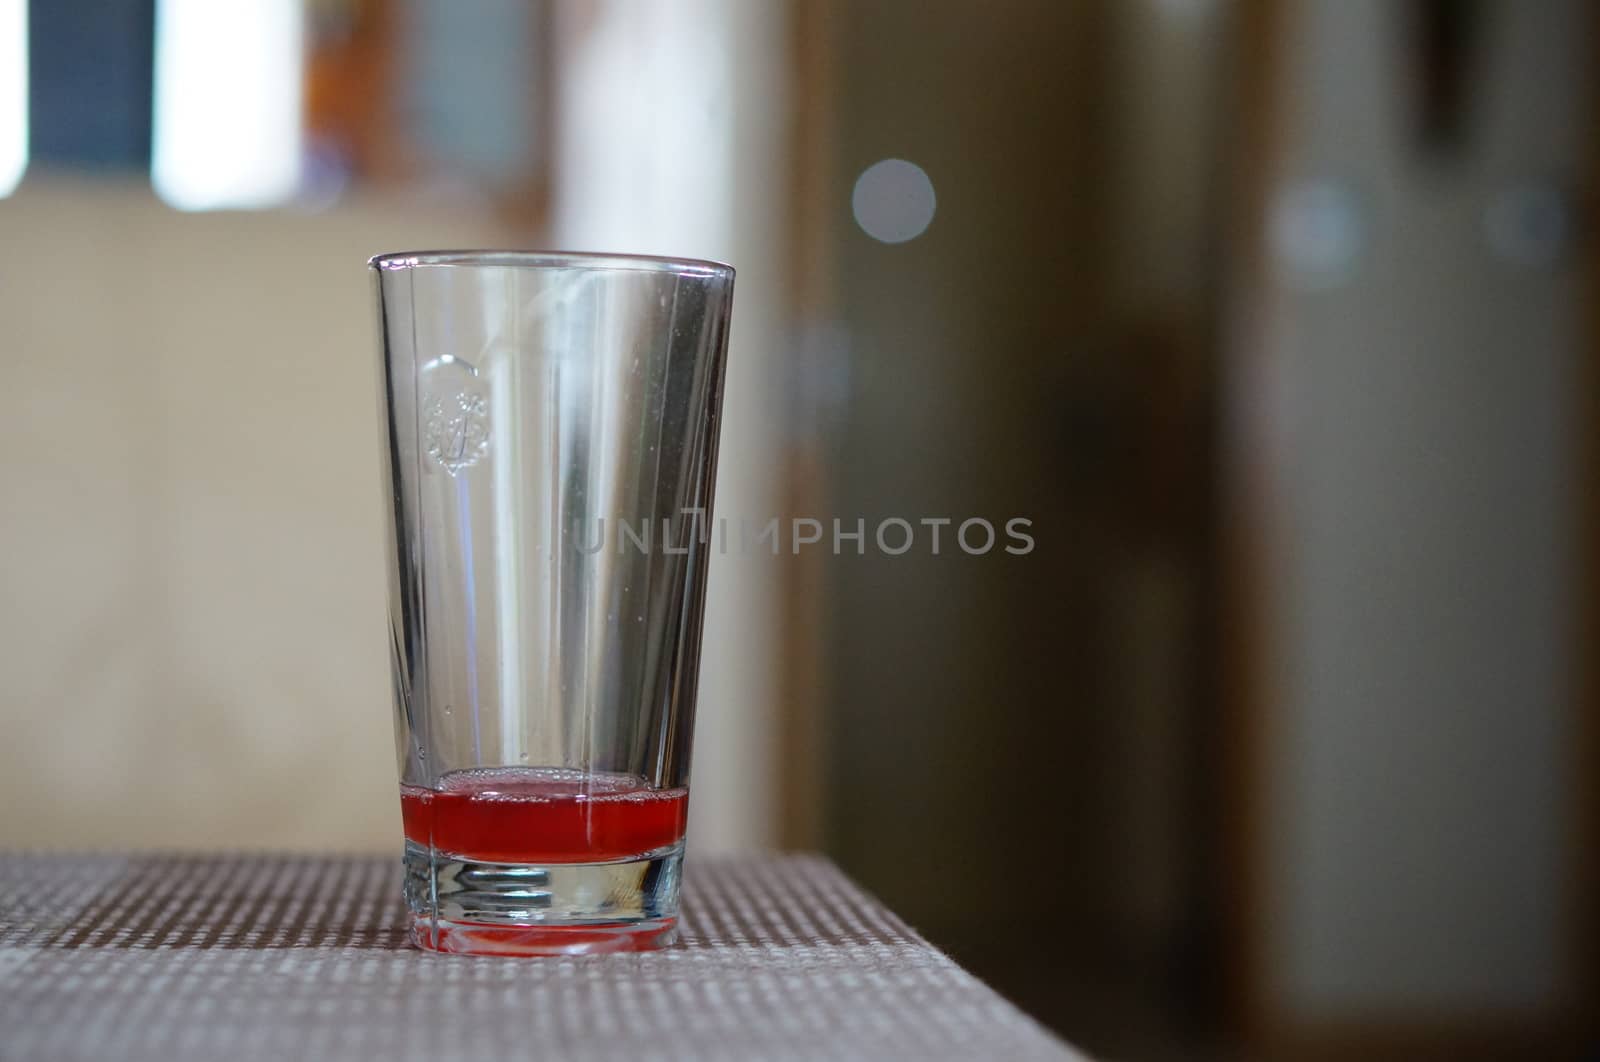 Almost empty glass with juice standing on table